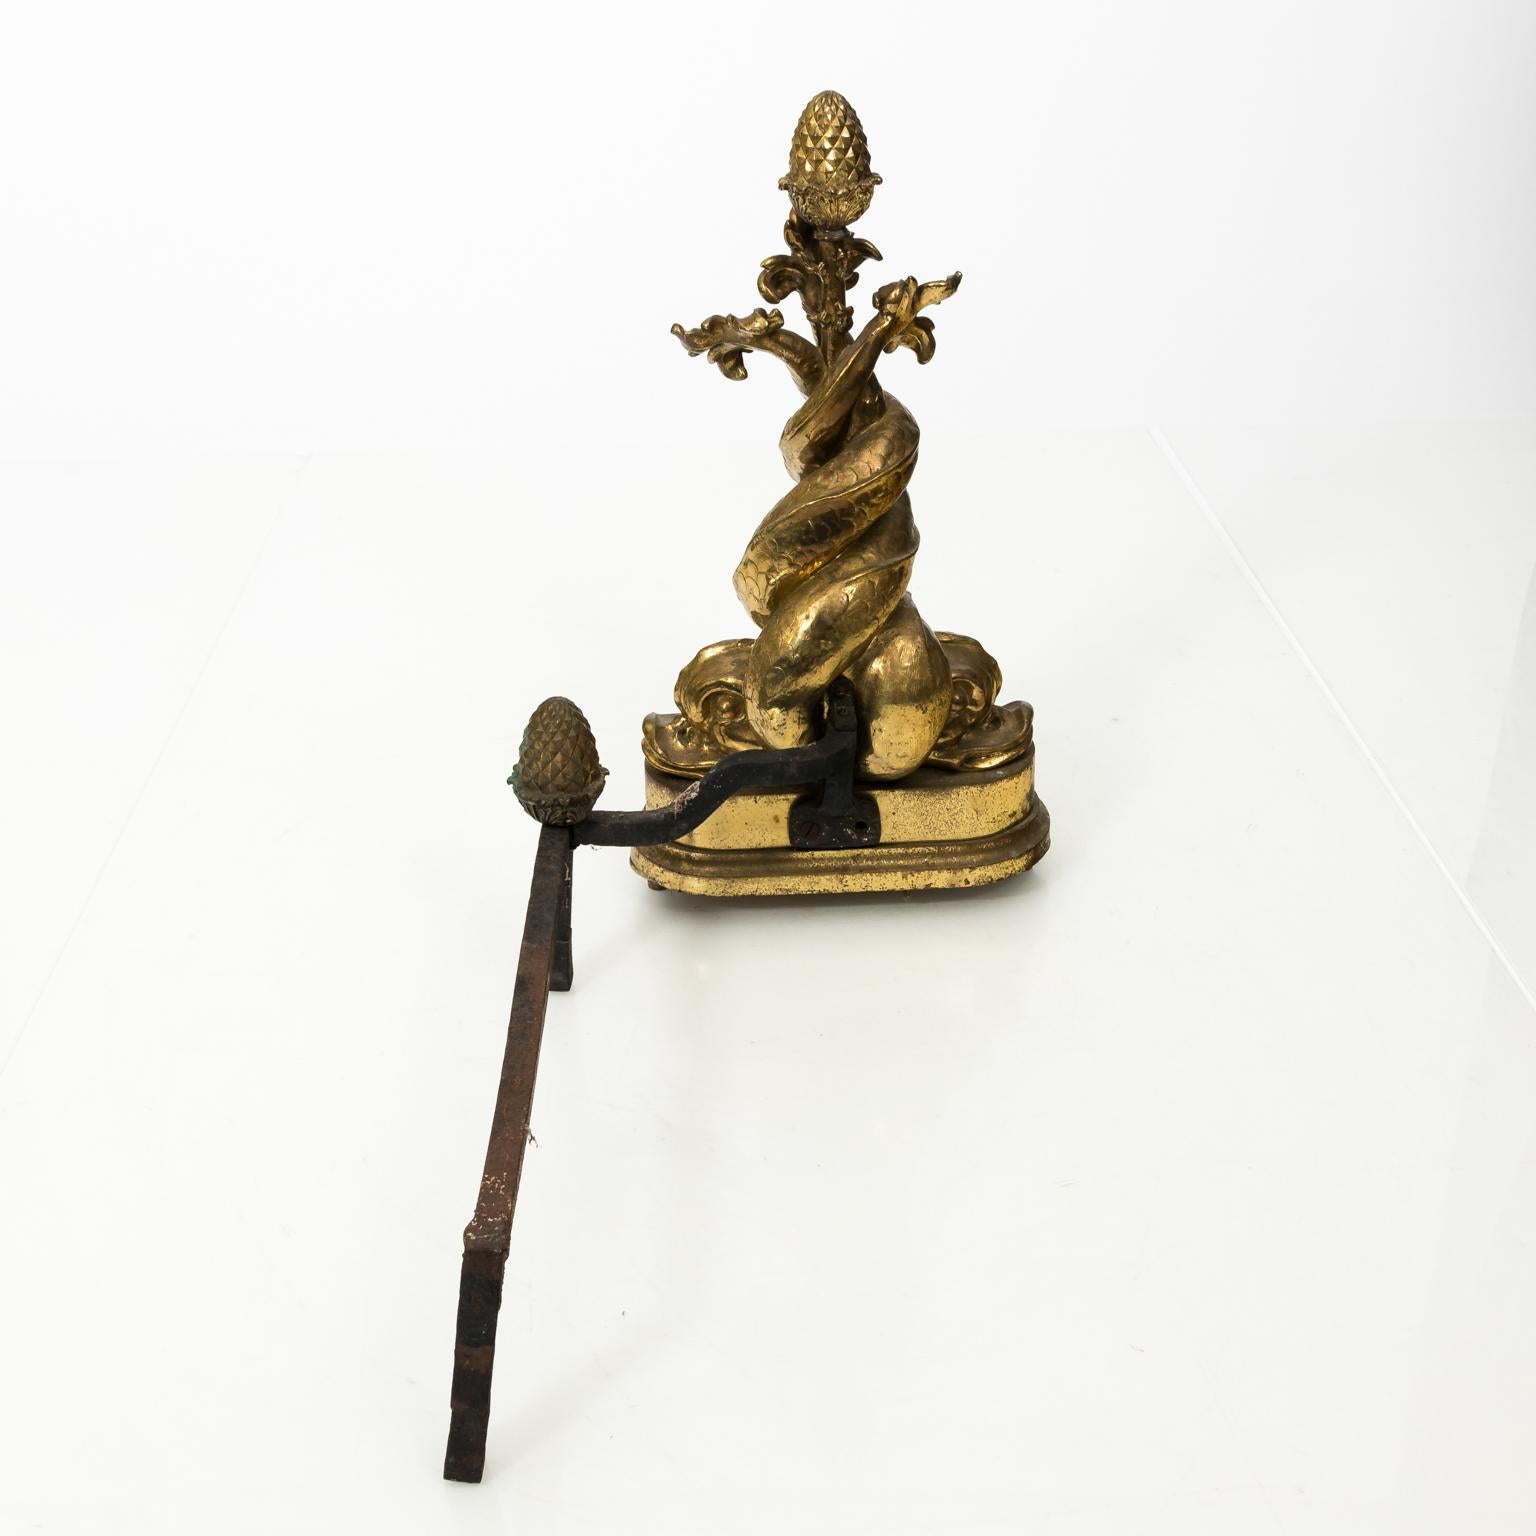 Pair of Baroque style polished brass andirons with dolphins and acorn finials, circa early 20th century.
   